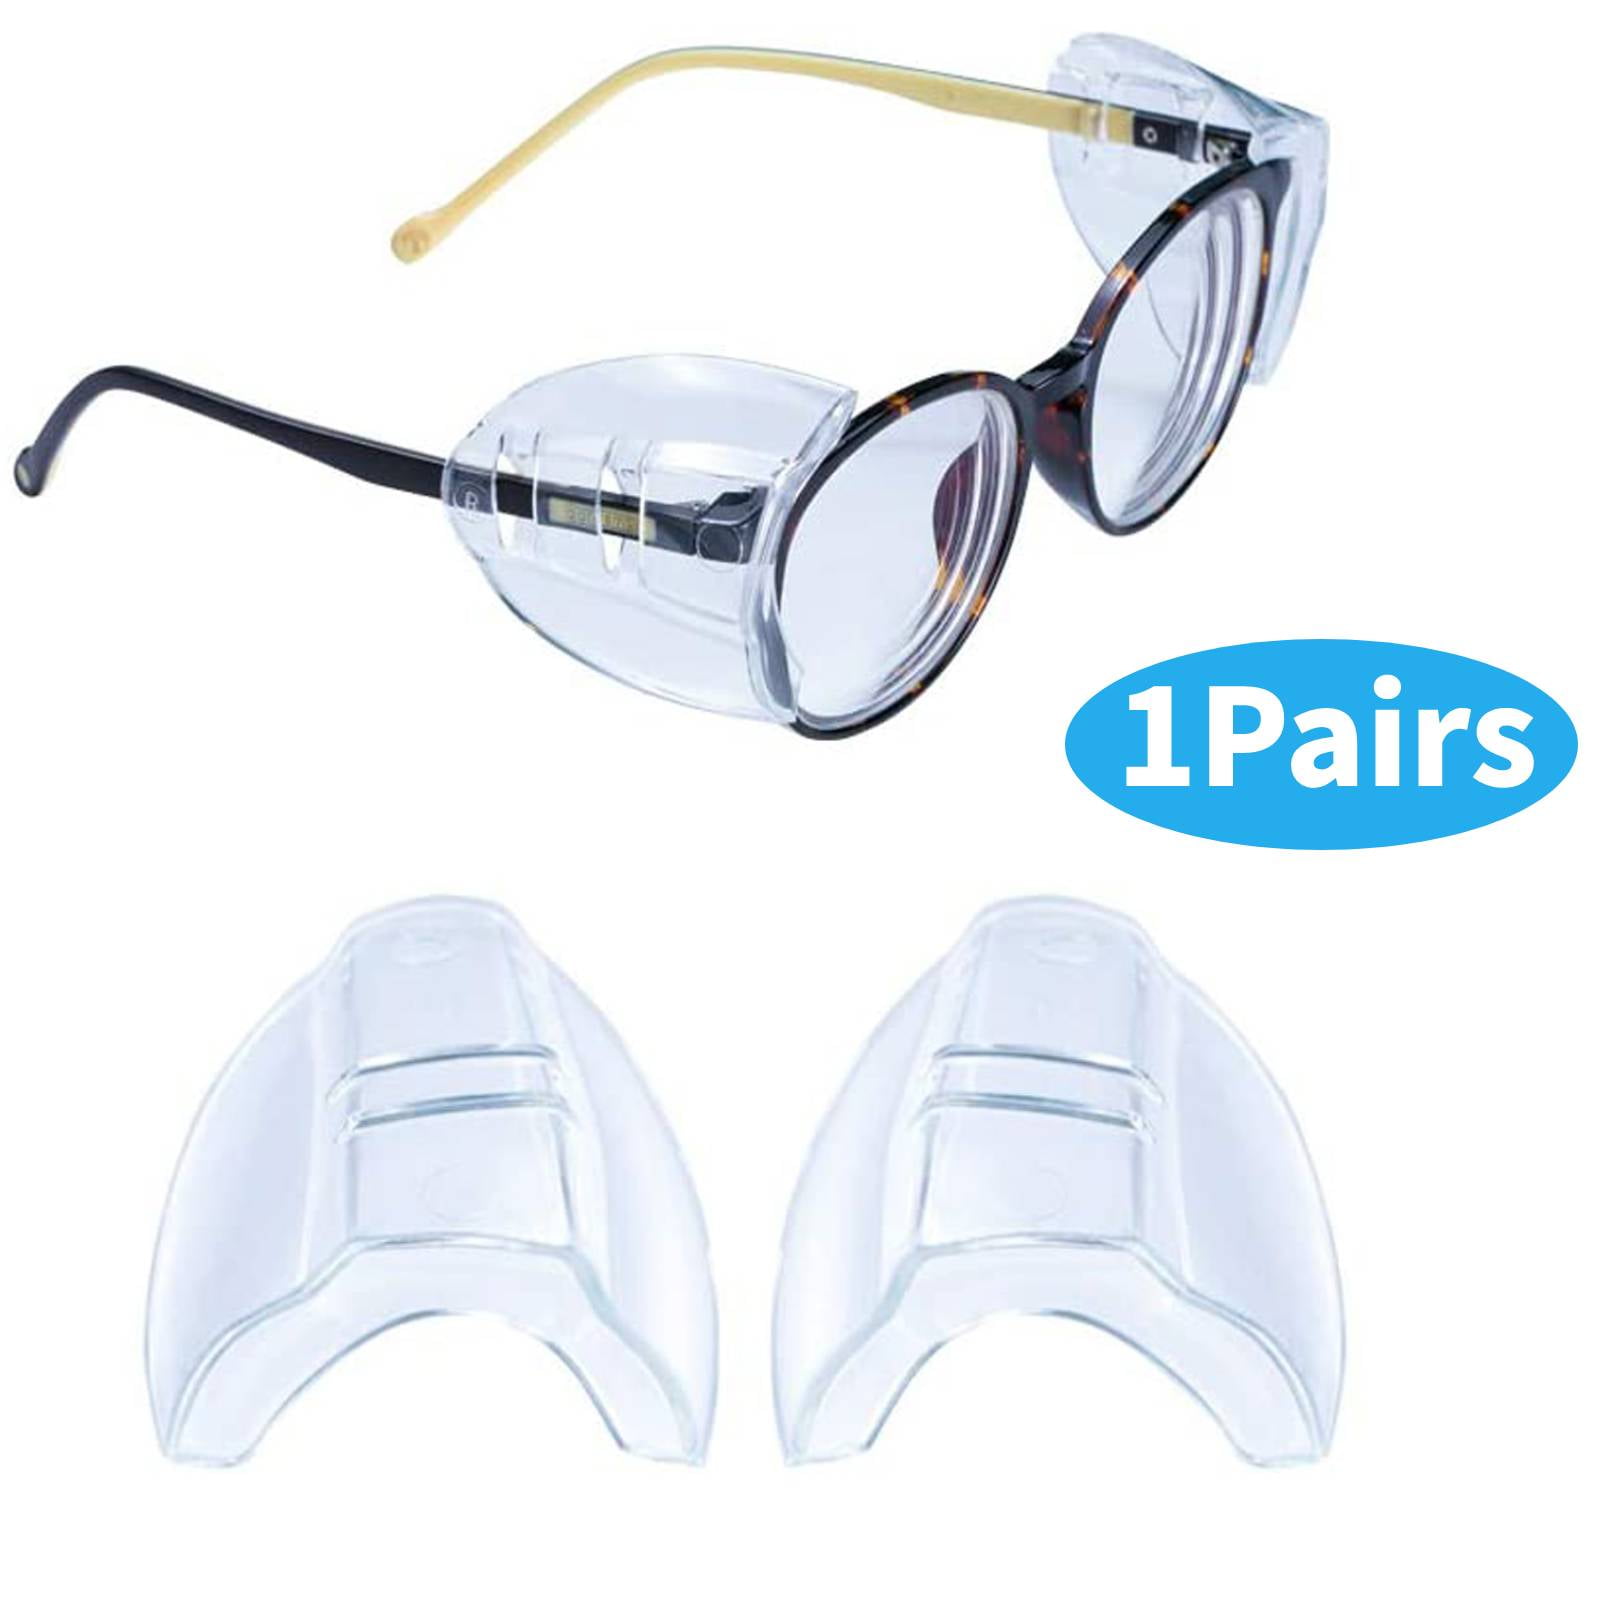 2x clear universal flexible side shield safety glasses goggles eye protectiBIIJ 